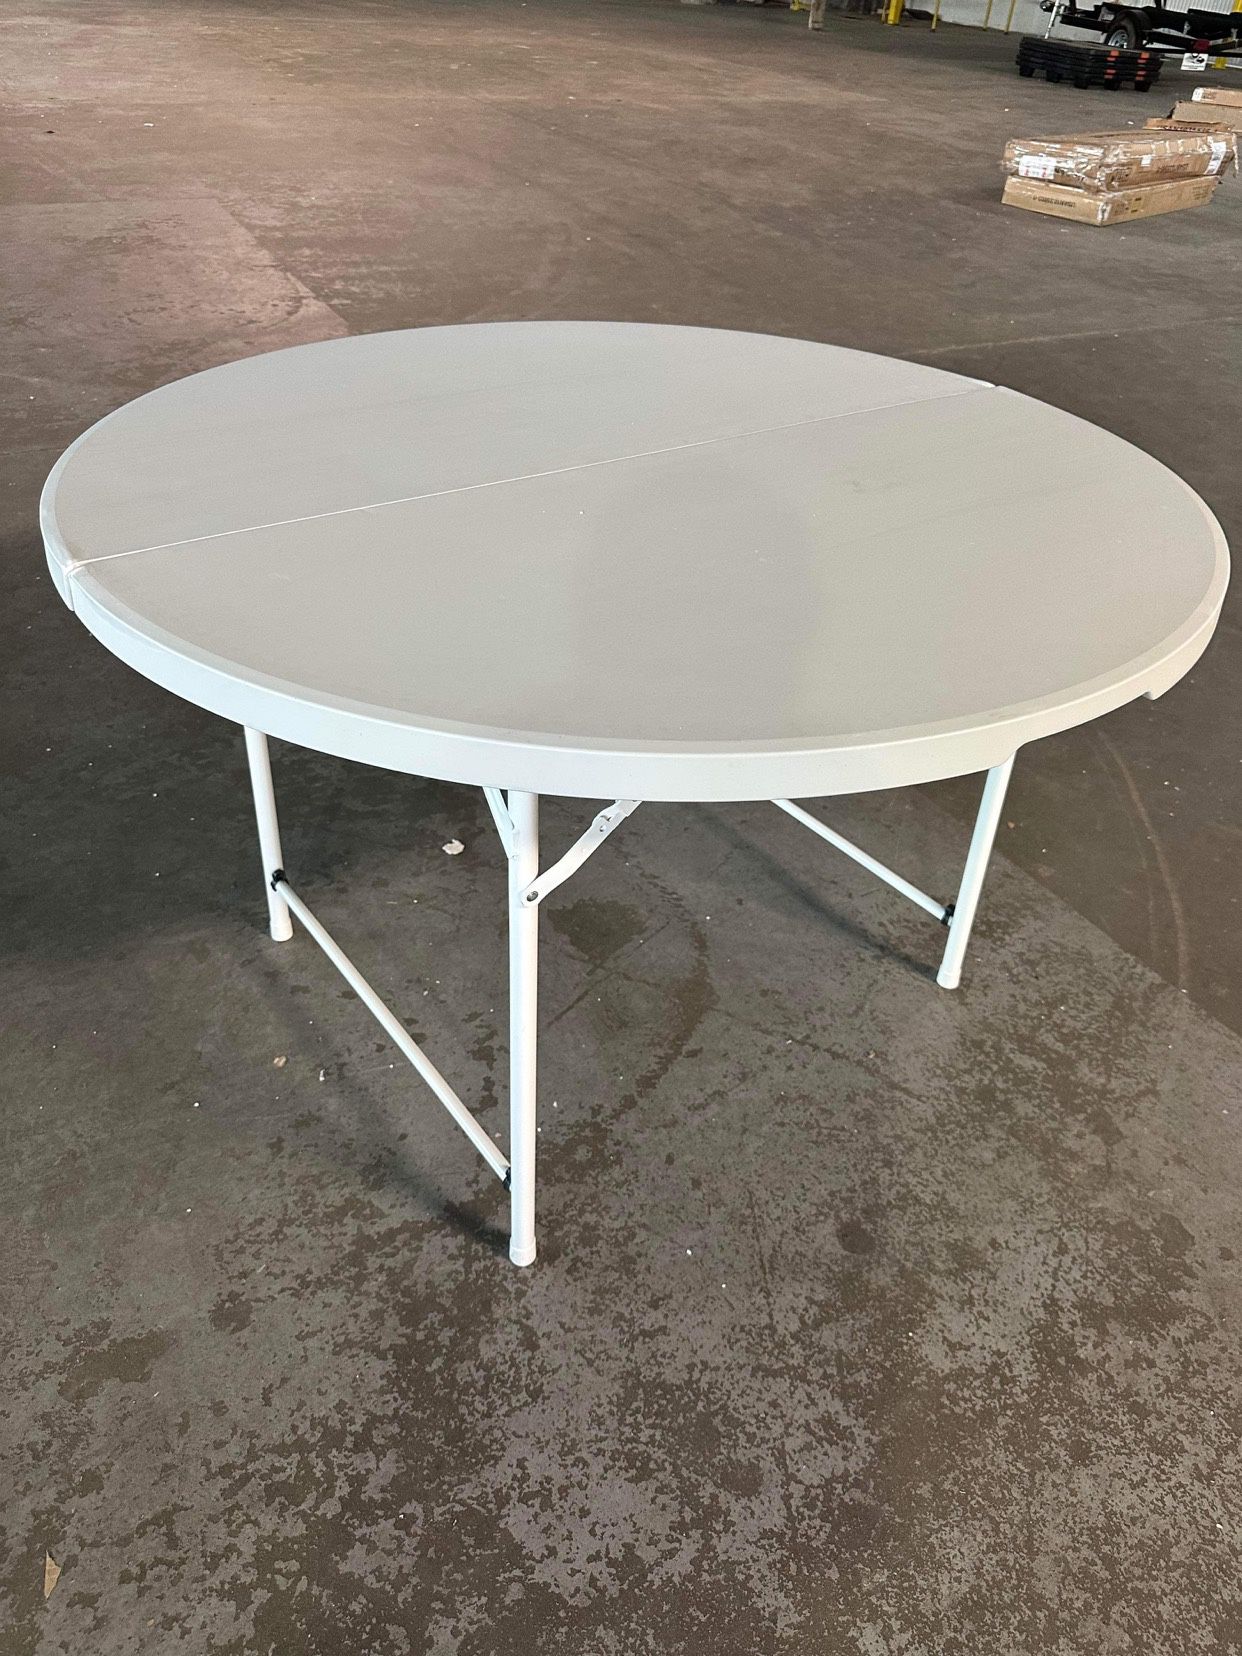 48” Round Folding Table, 4 Foot White Plastic Folding Table Portable for Patio Party Camping Conference Wedding Event, Comfortable for 4-6 Seats